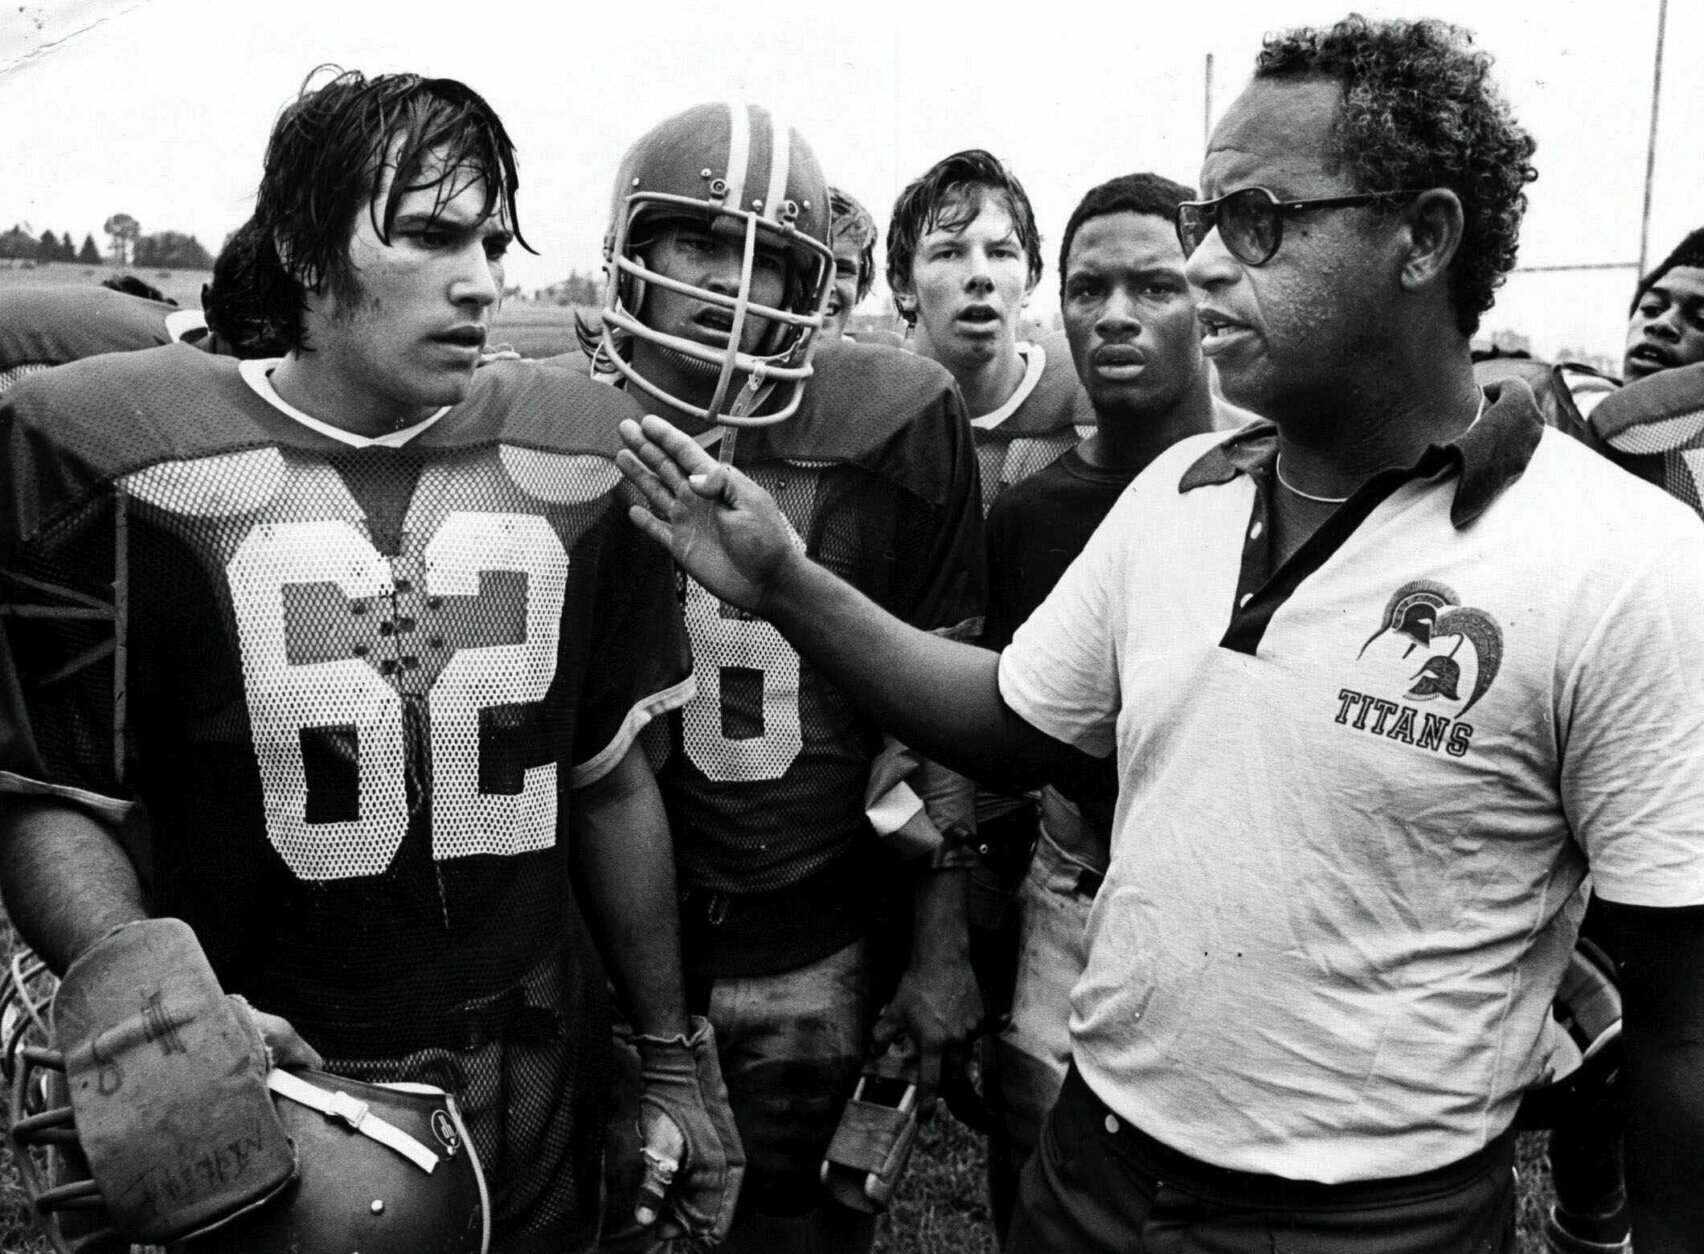 Remember The Titans, Herman Boone, T. C. Williams High School, African American Olympian, Black Olympian, African American Athlete, Black Athlete, KOLUMN Magazine, KOLUMN, KINDR'D Magazine, KINDR'D, Willoughby Avenue, Wriit,